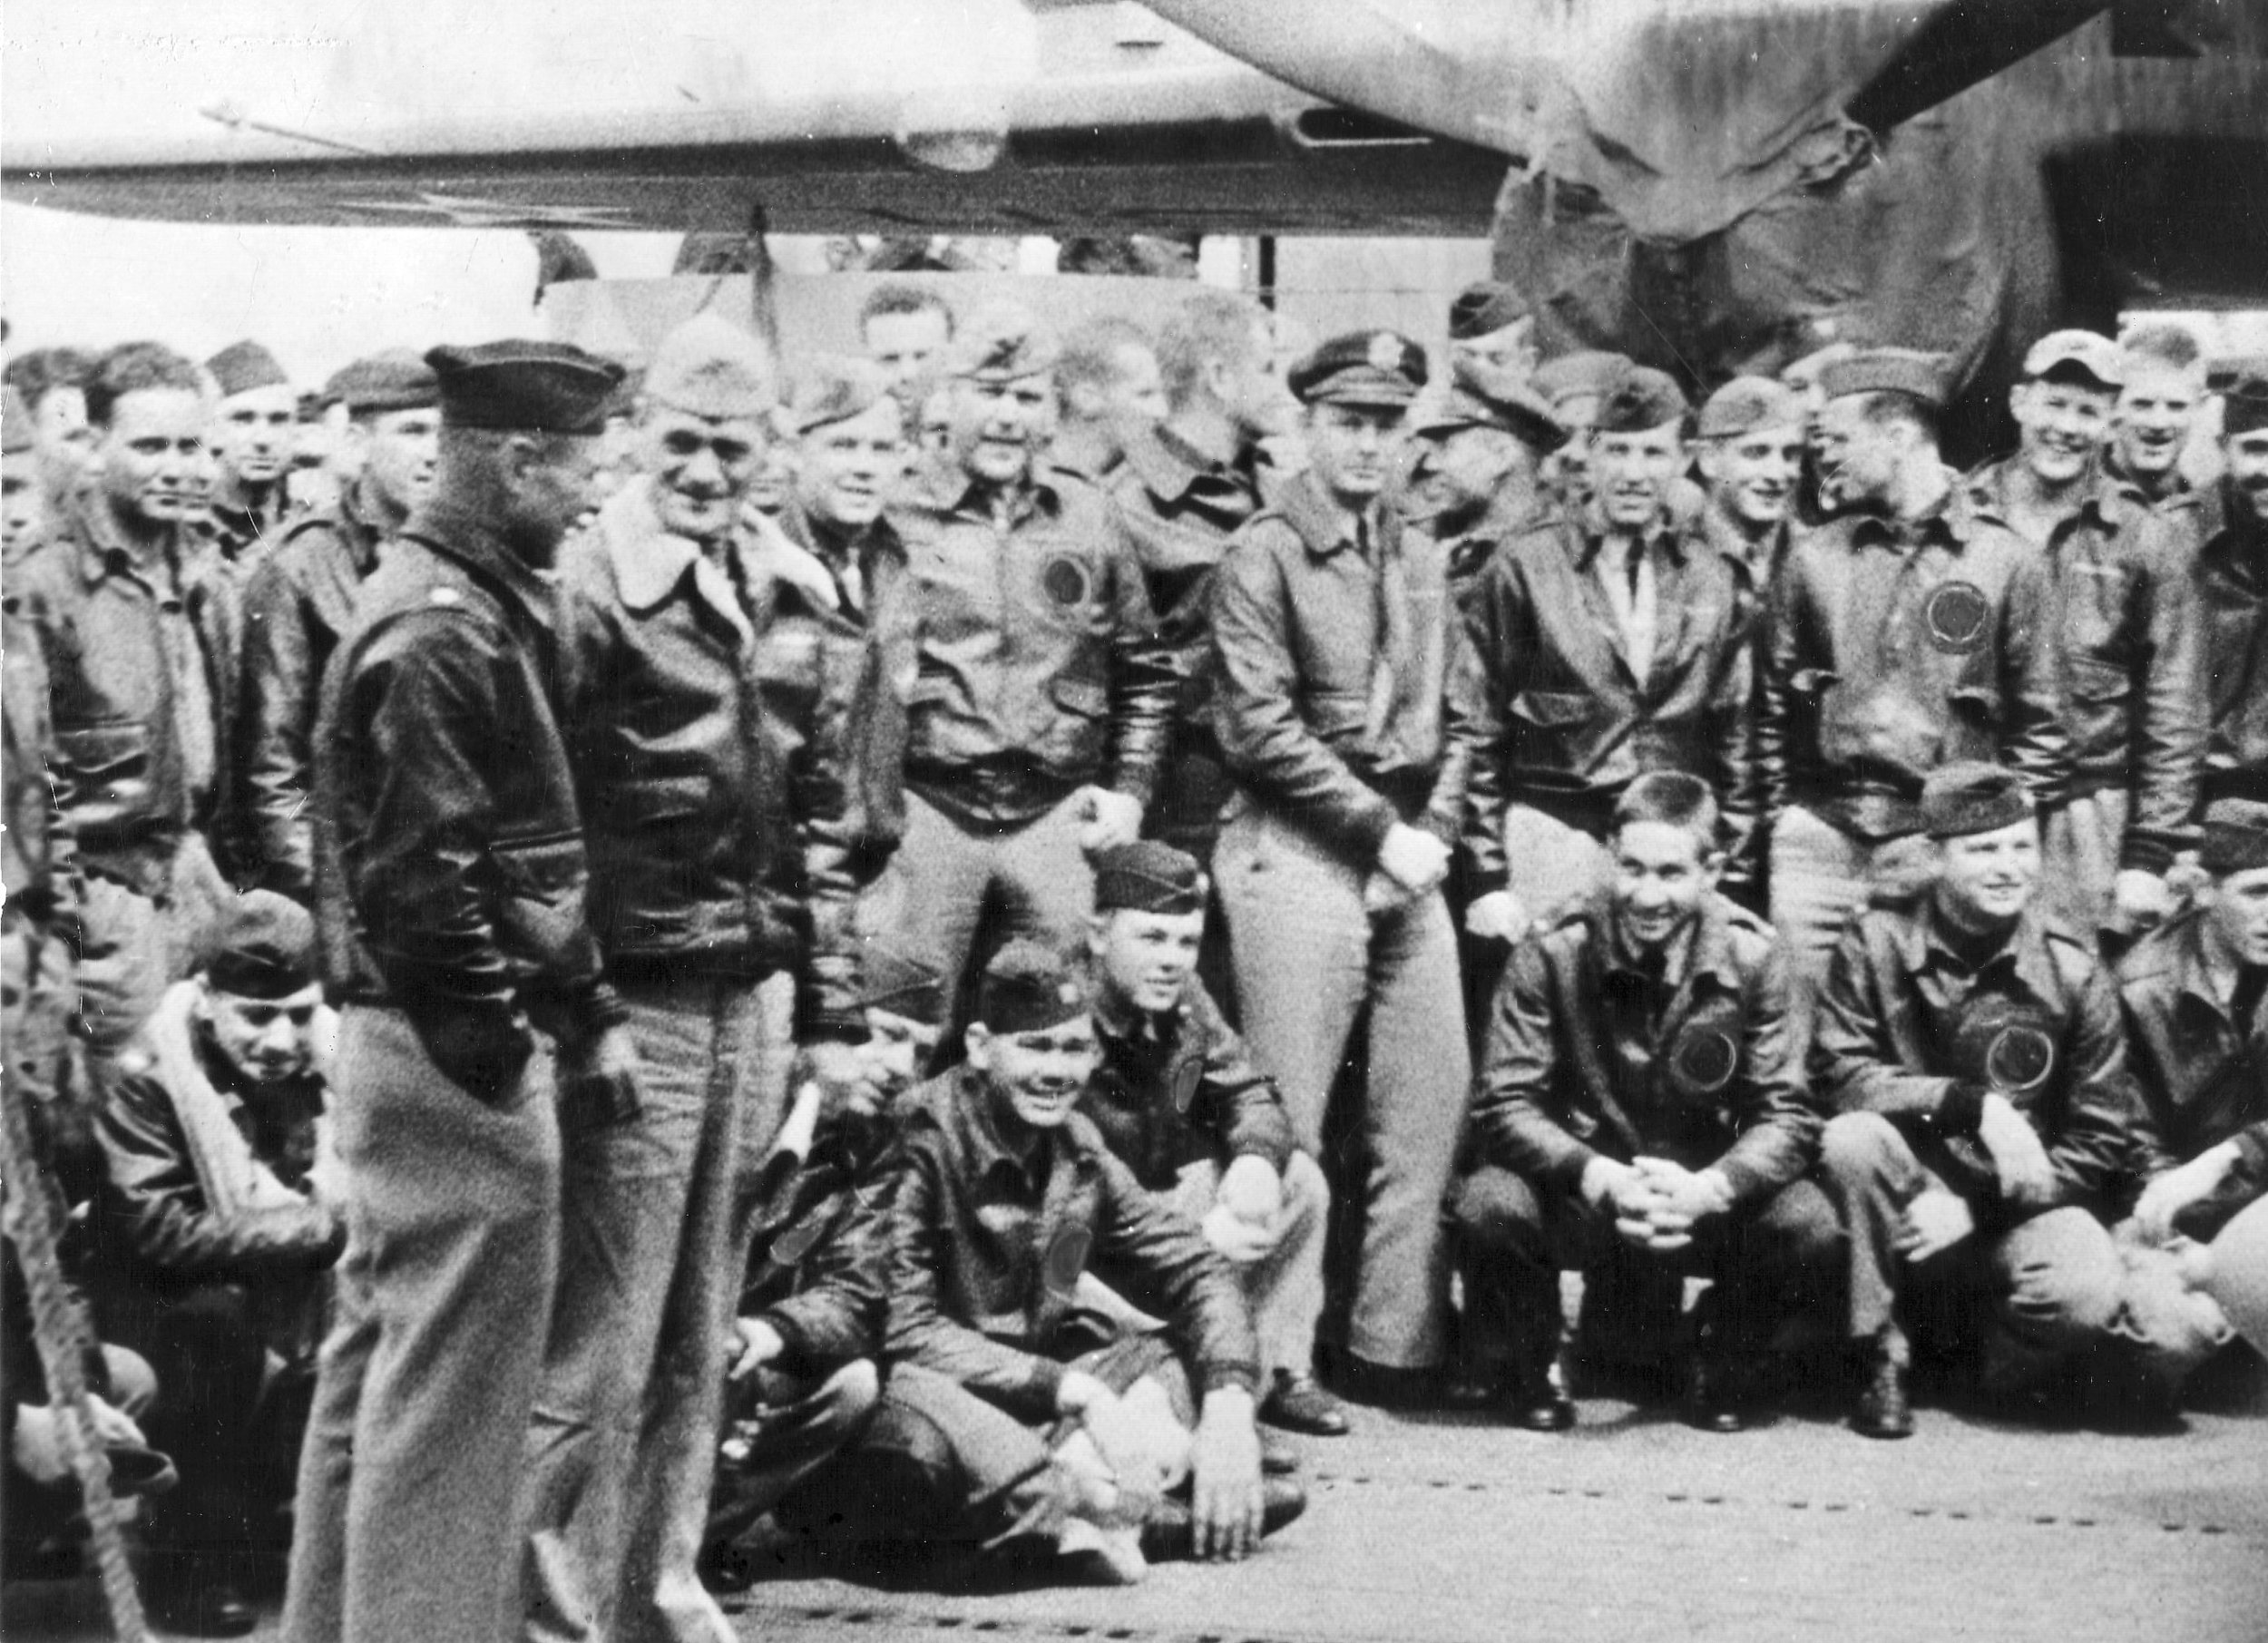  Orders in hand, Capt. Marc A. Mitscher, U.S.N., skipper of the U.S.S. Hornet (CU-8) chats with Maj. Gen. James Doolittle, U.S. Army. Some of the 80 Army fliers who took part in the historic Japanese raid are pictured with the two fliers. (Wikimedia)